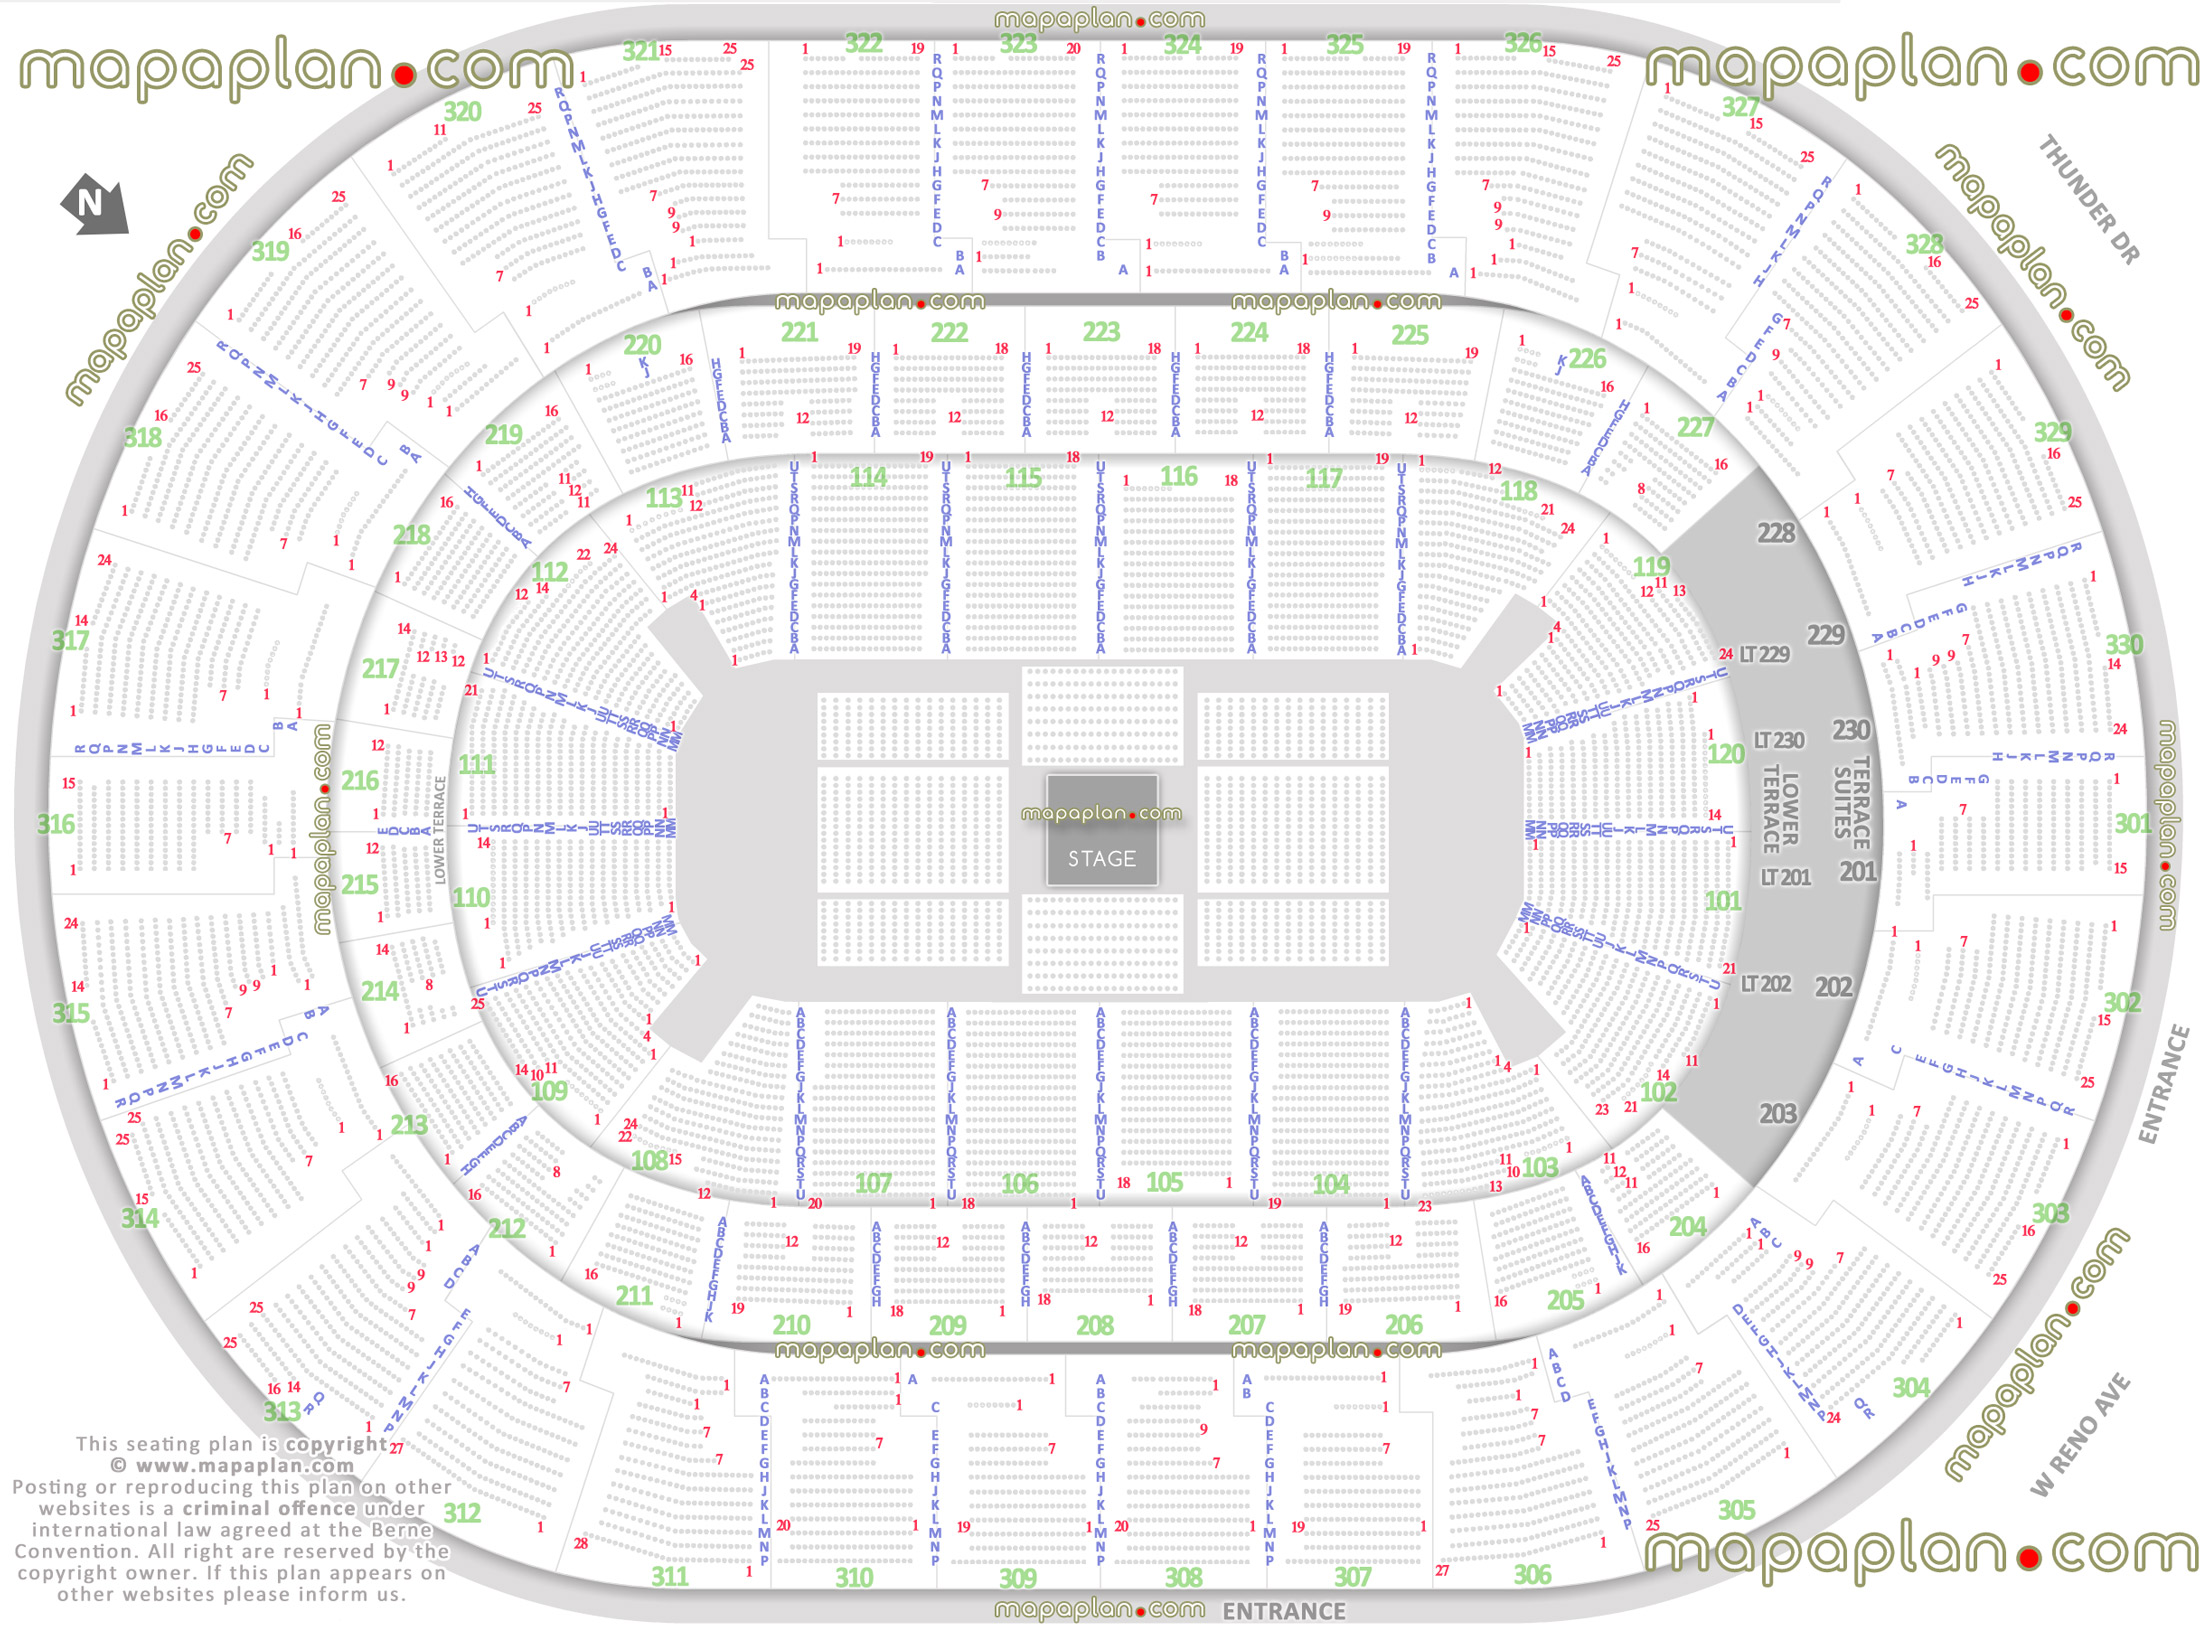 concert stage round printable virtual layout 360 degree arrangement interactive diagram seats row lower club upper sections seats 201 202 203 204 205 206 207 208 209 210 211 212 213 214 215 216 217 218 219 220 221 222 223 224 225 226 227 228 229 230 Oklahoma City Paycom Center Arena seating chart